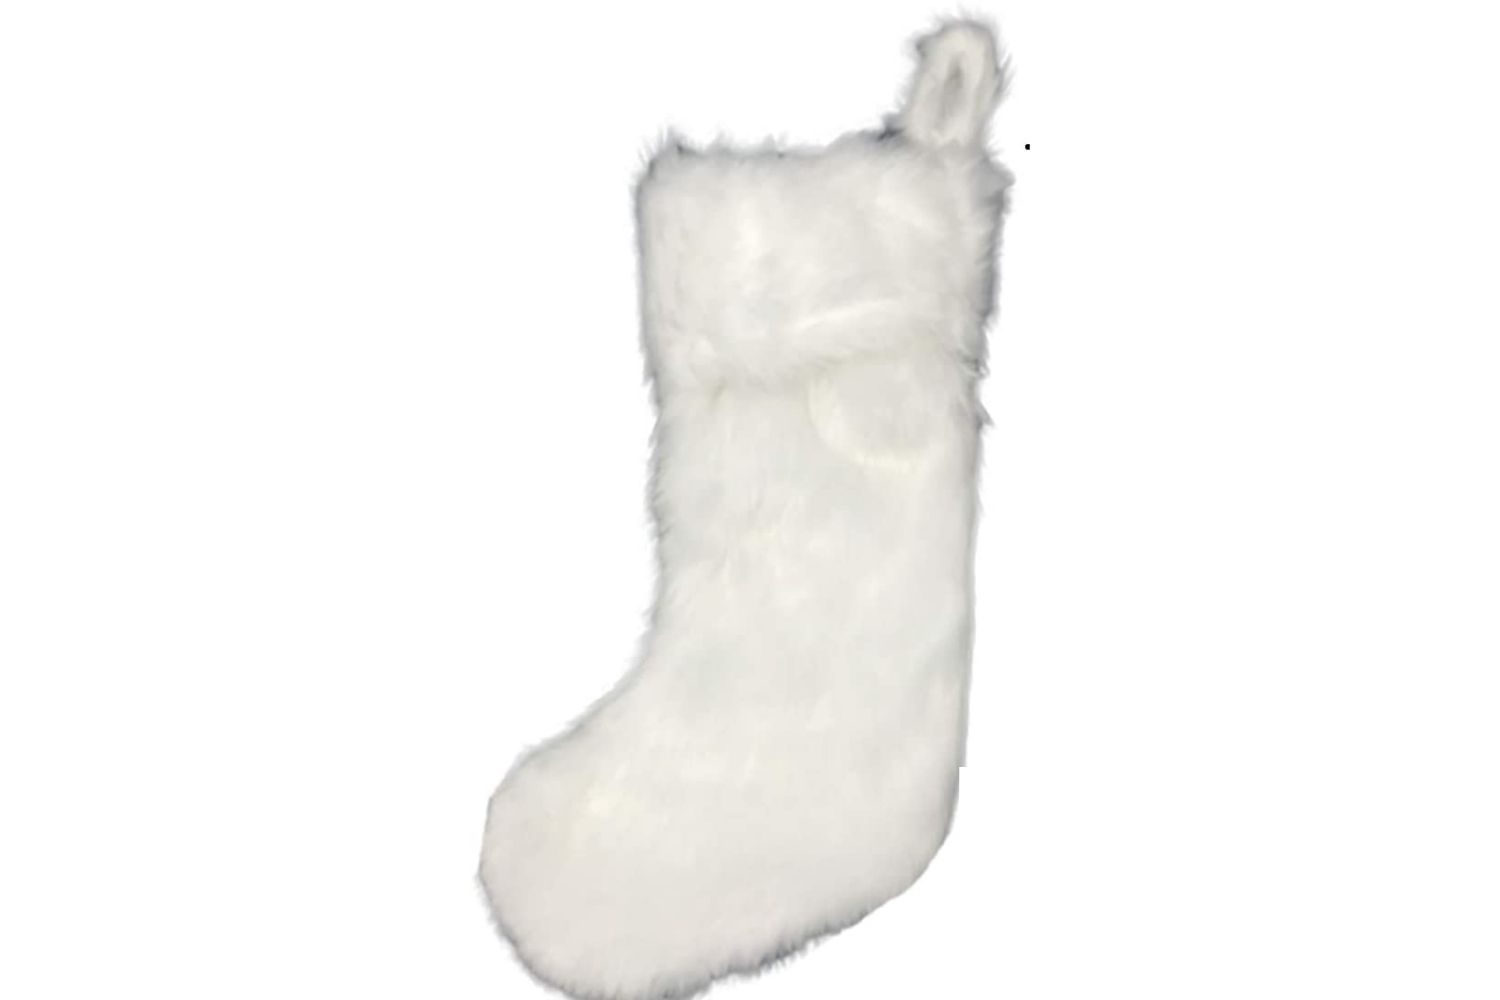 The Best Christmas Stockings Option: AISENO 2 Pack Faux Fur Christmas Stockings